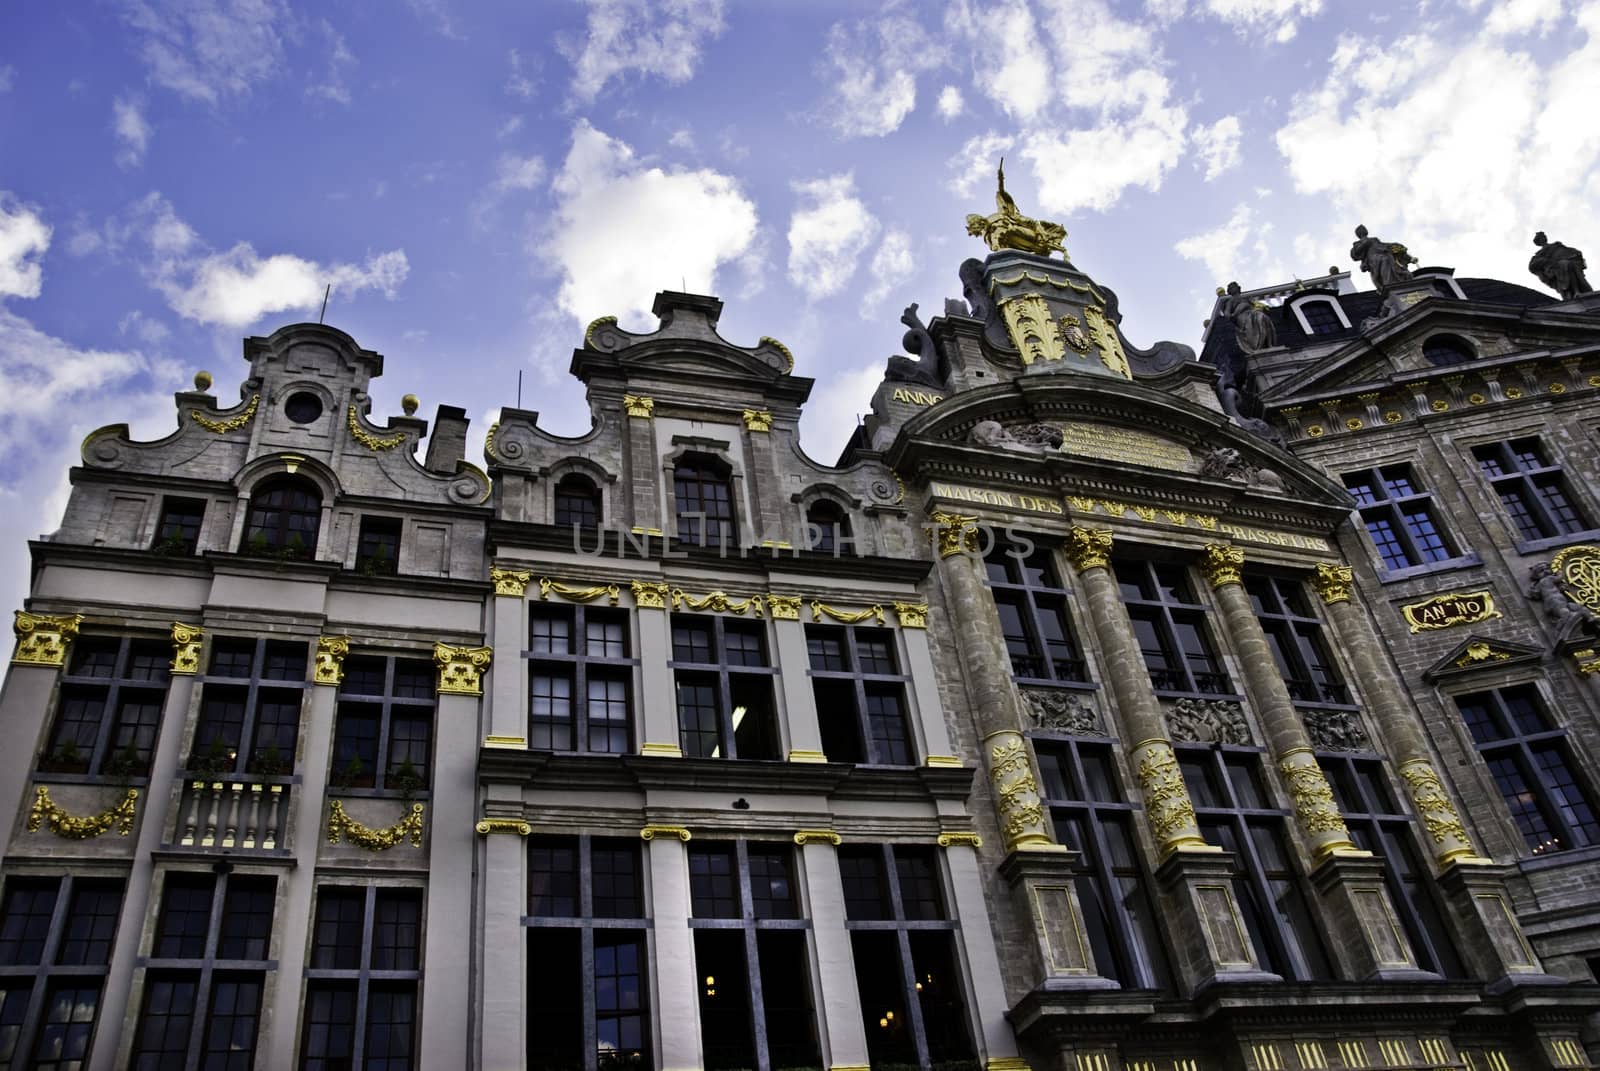 Guild Houses - Grand Place, Brussels by ACMPhoto